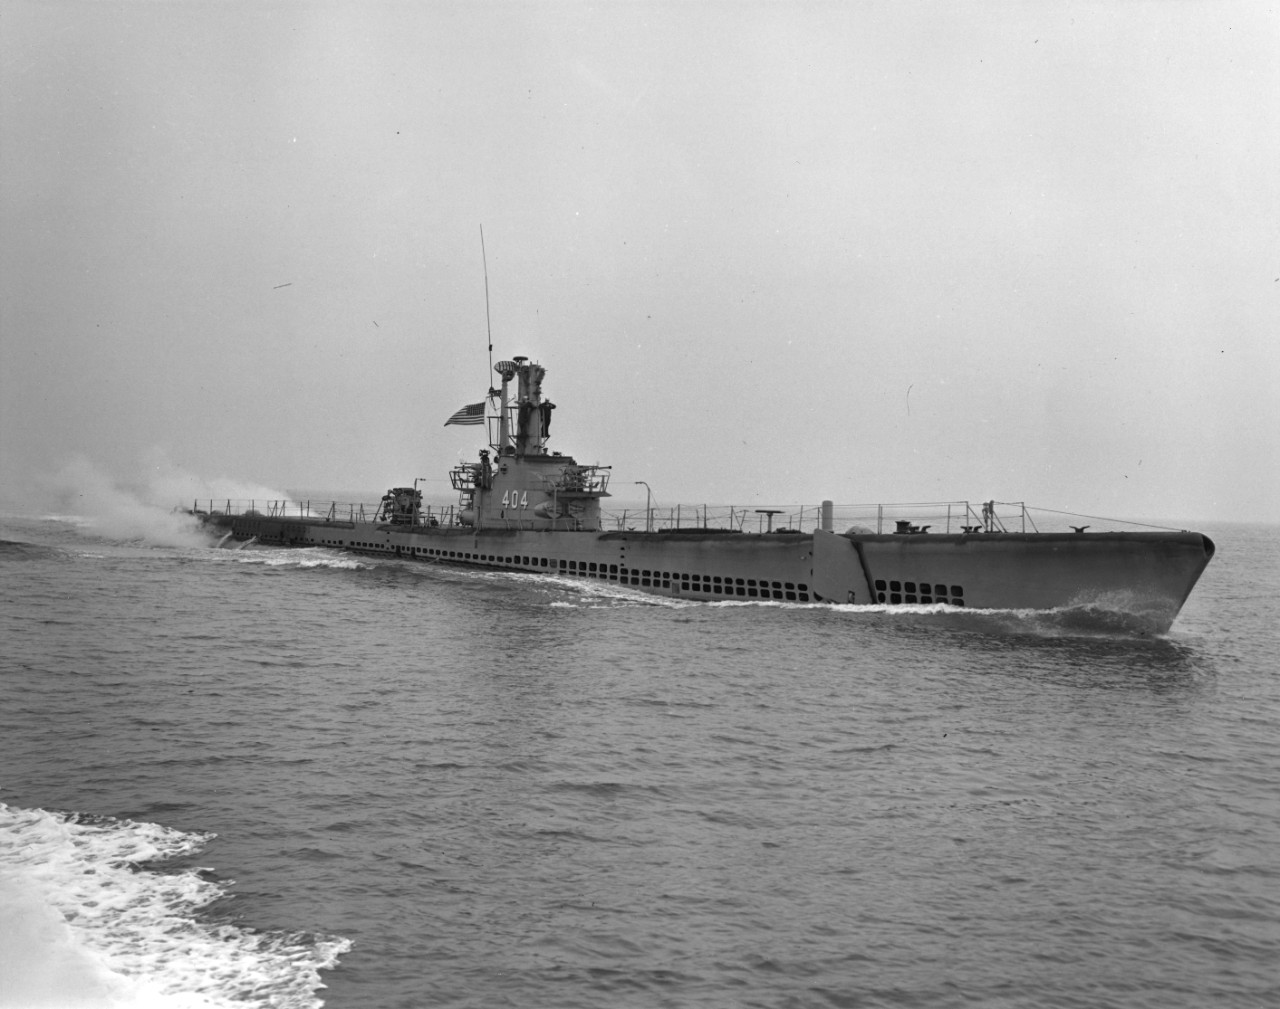 Starboard bow view of submarine USS Spikefish (SS-404) underway on the surface